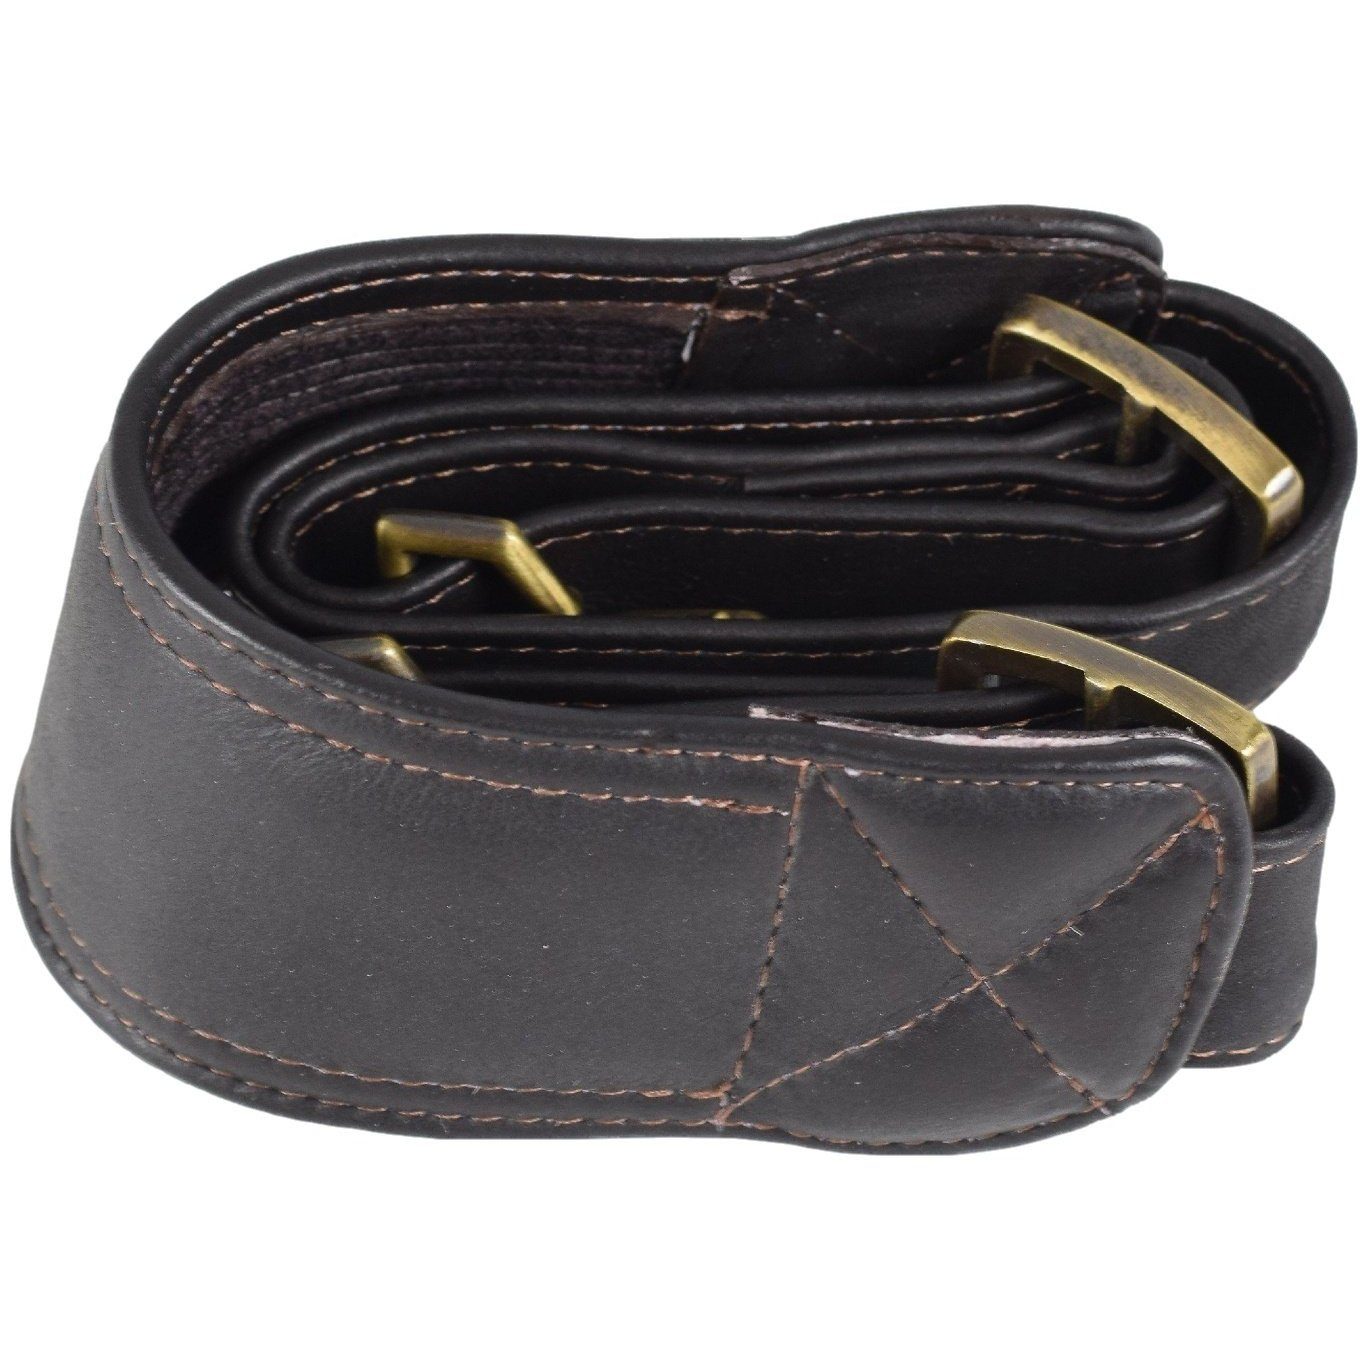 Fixed black leather purse strap made of high quality 5-6 oz leather - Land  & Kamp